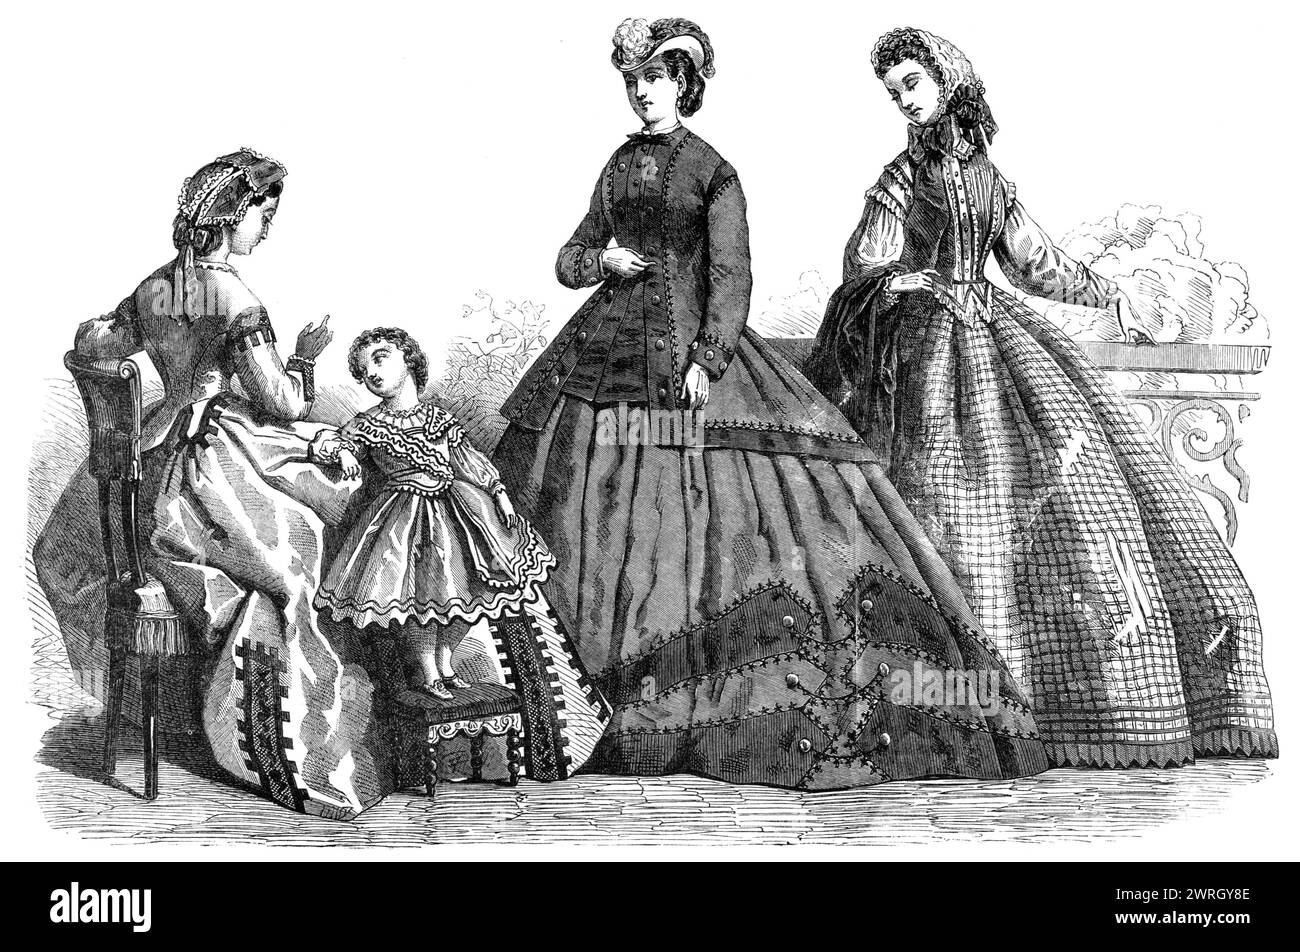 Paris fashions for October, 1864. 'Fig. 1. Evening Dress. Robe of white alpaca, ornamented with black lace insertion...Muslin chemisette, with collar and cuffs of embroidered muslin. The head-dress is composed of a wide entredeux, trimmed with narrow guipure over rose-coloured silk, terminated by a rose-coloured silk bow and ends. Fig. 2. Dress for a Little Boy. Low-necked nankeen blouse, trimmed with black worsted braid; the rounded teeth on the edge of the skirt are bordered with black binding. Wide sleeves, with a band descending from the shoulder...Fig. 3. Dress for a Young Lady. Checkered Stock Photo